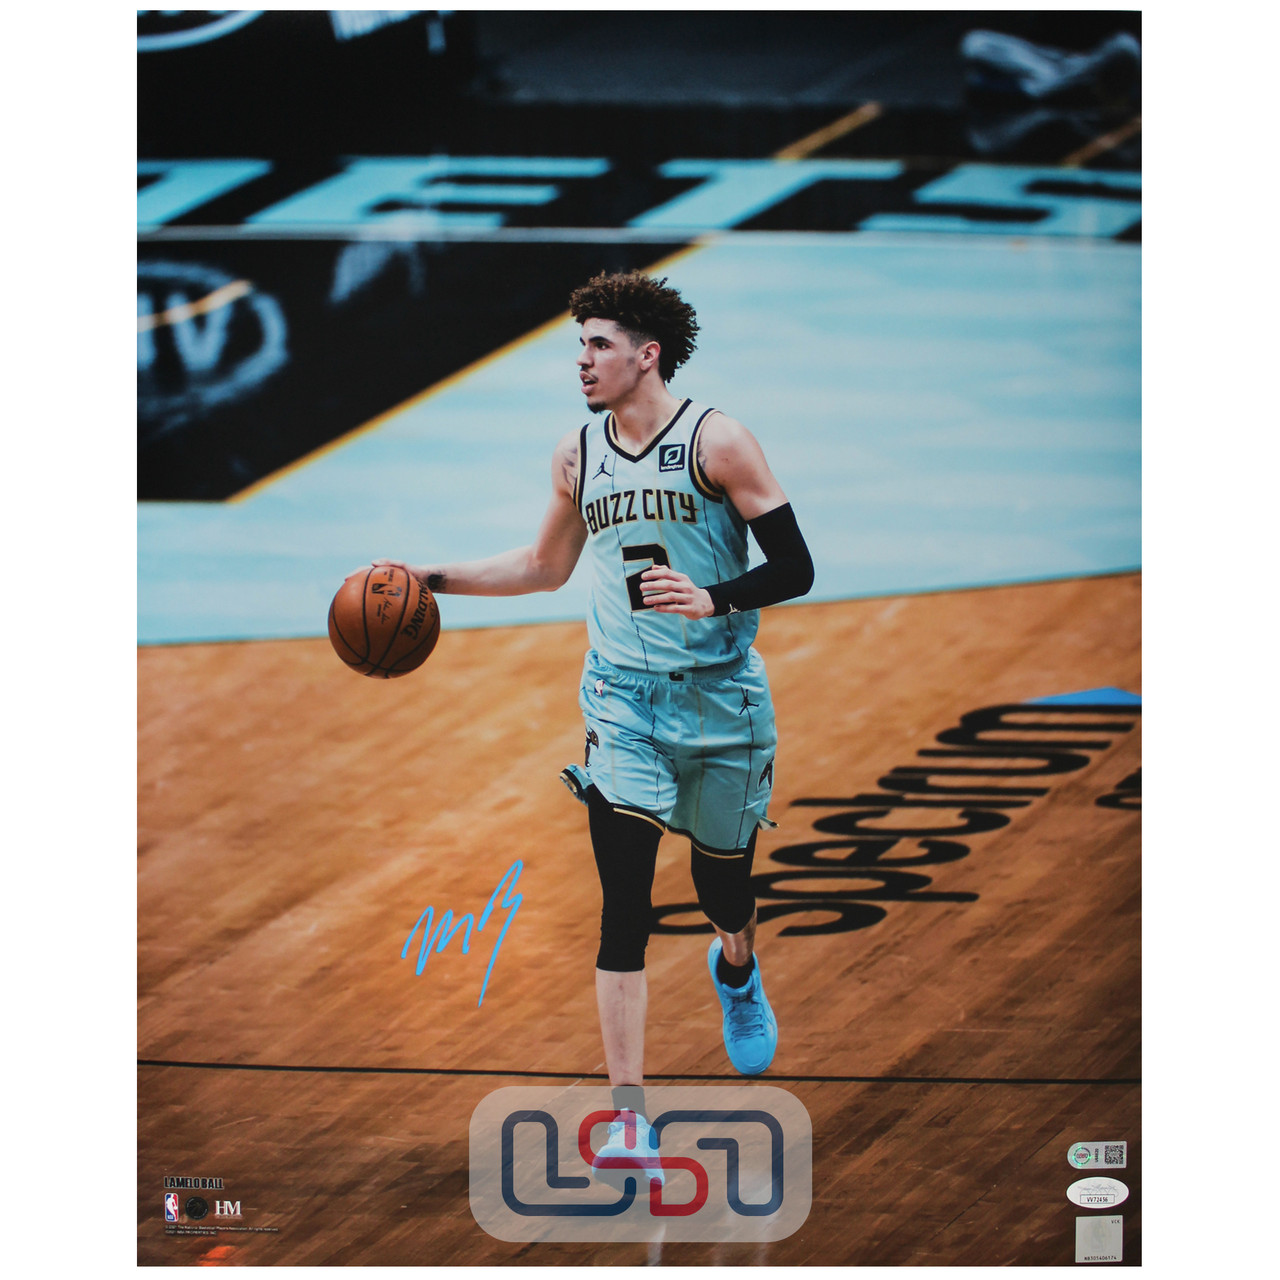 LaMelo Ball of the Charlotte Hornets signed